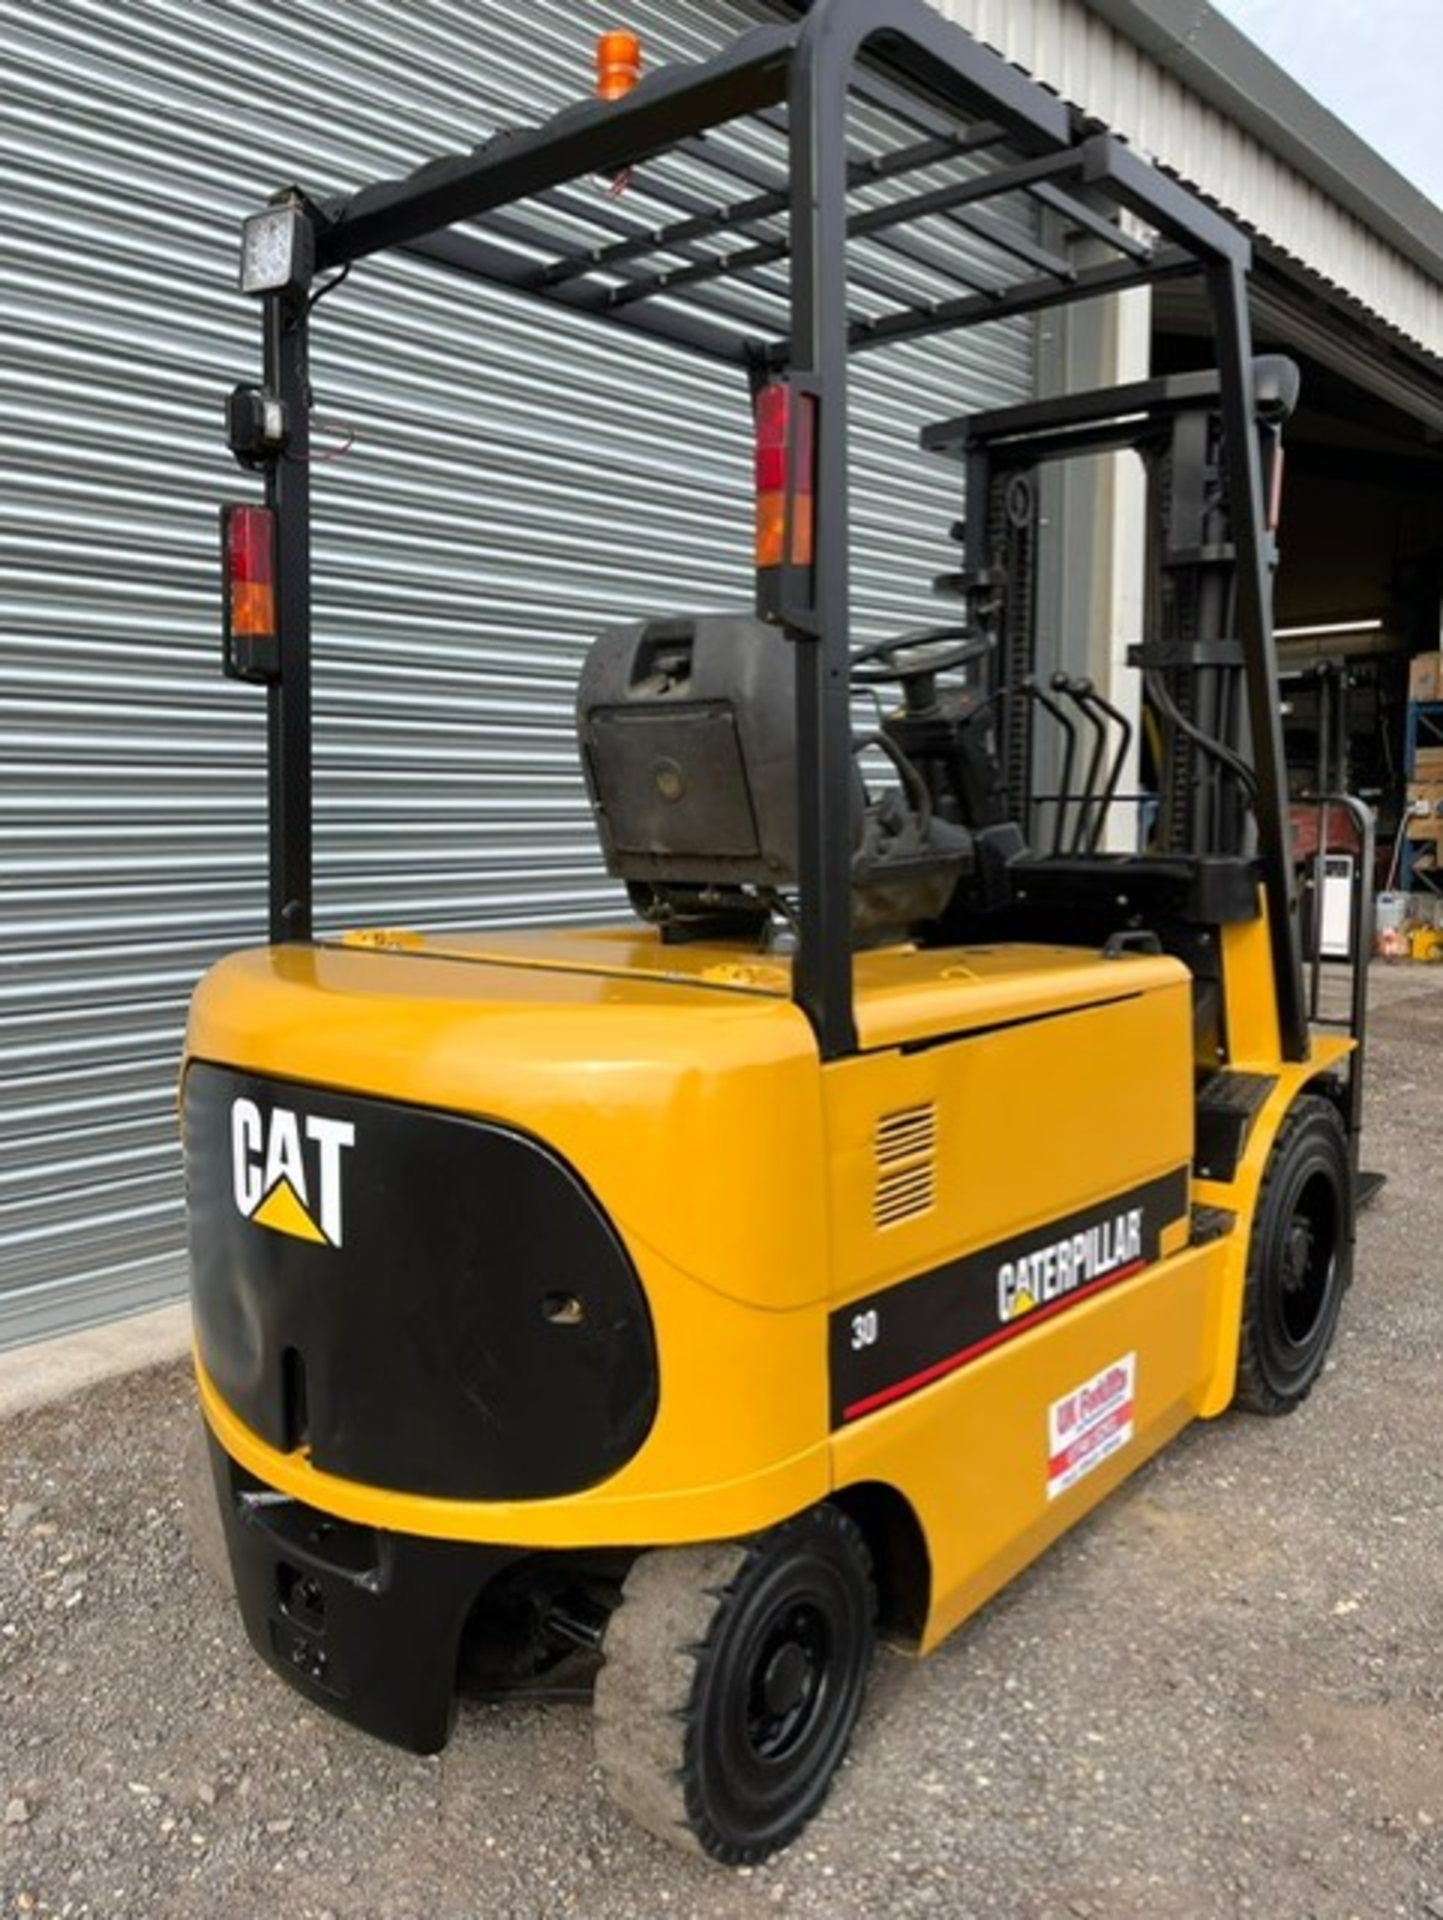 2003 CATERPILLAR, 3 Tonne Electric Forklift - Image 3 of 8